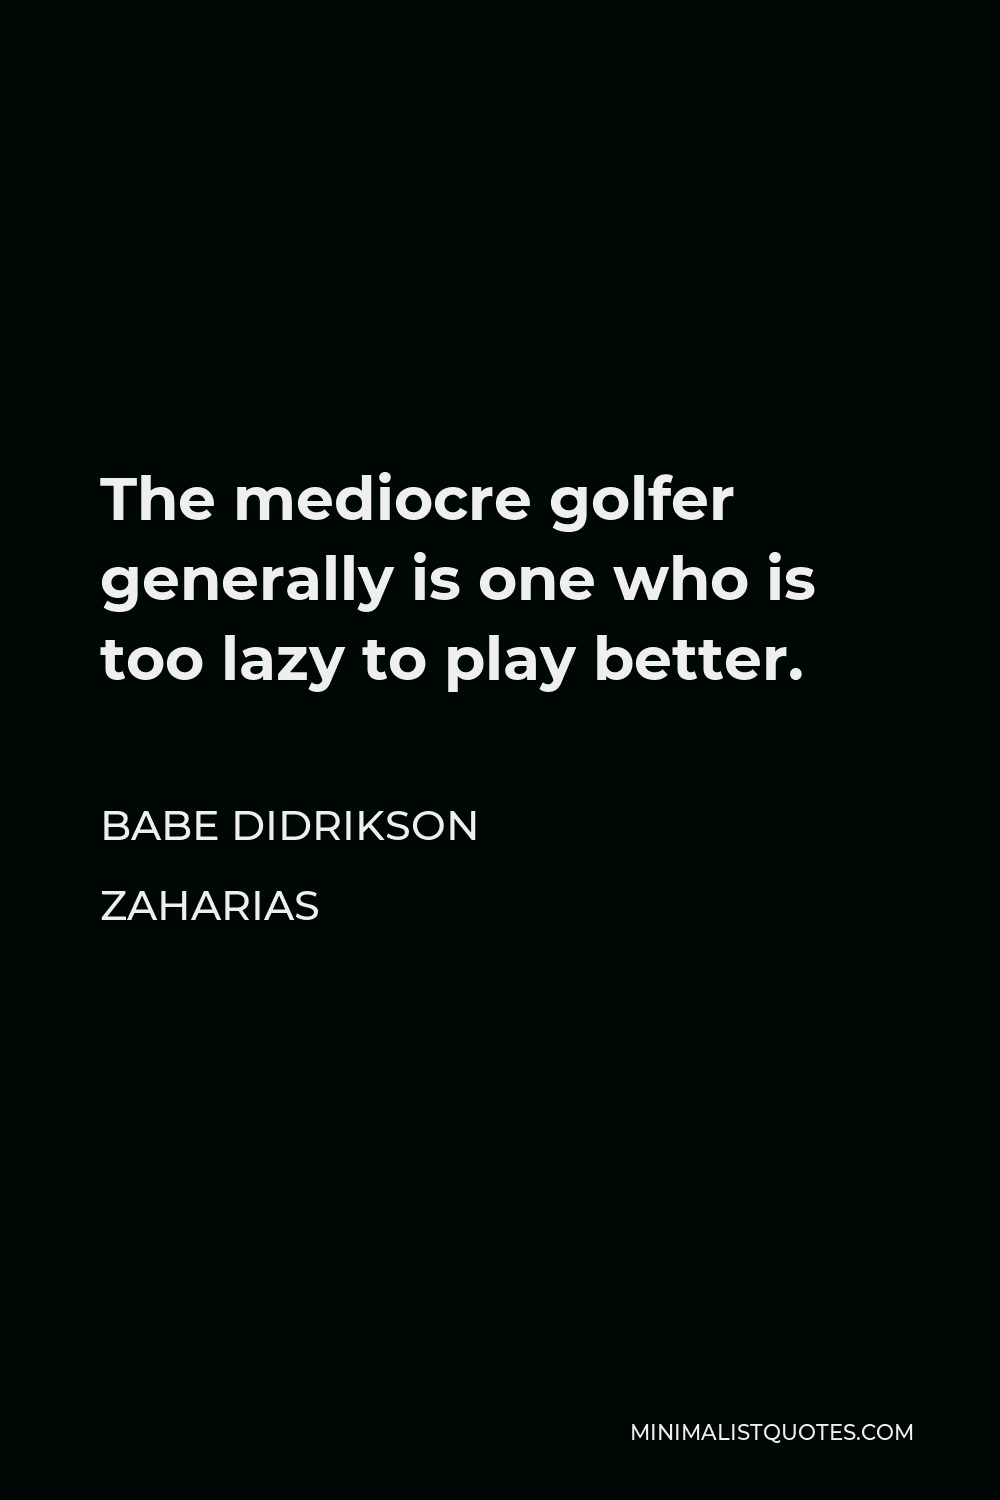 Babe Didrikson Zaharias Quote - The mediocre golfer generally is one who is too lazy to play better.